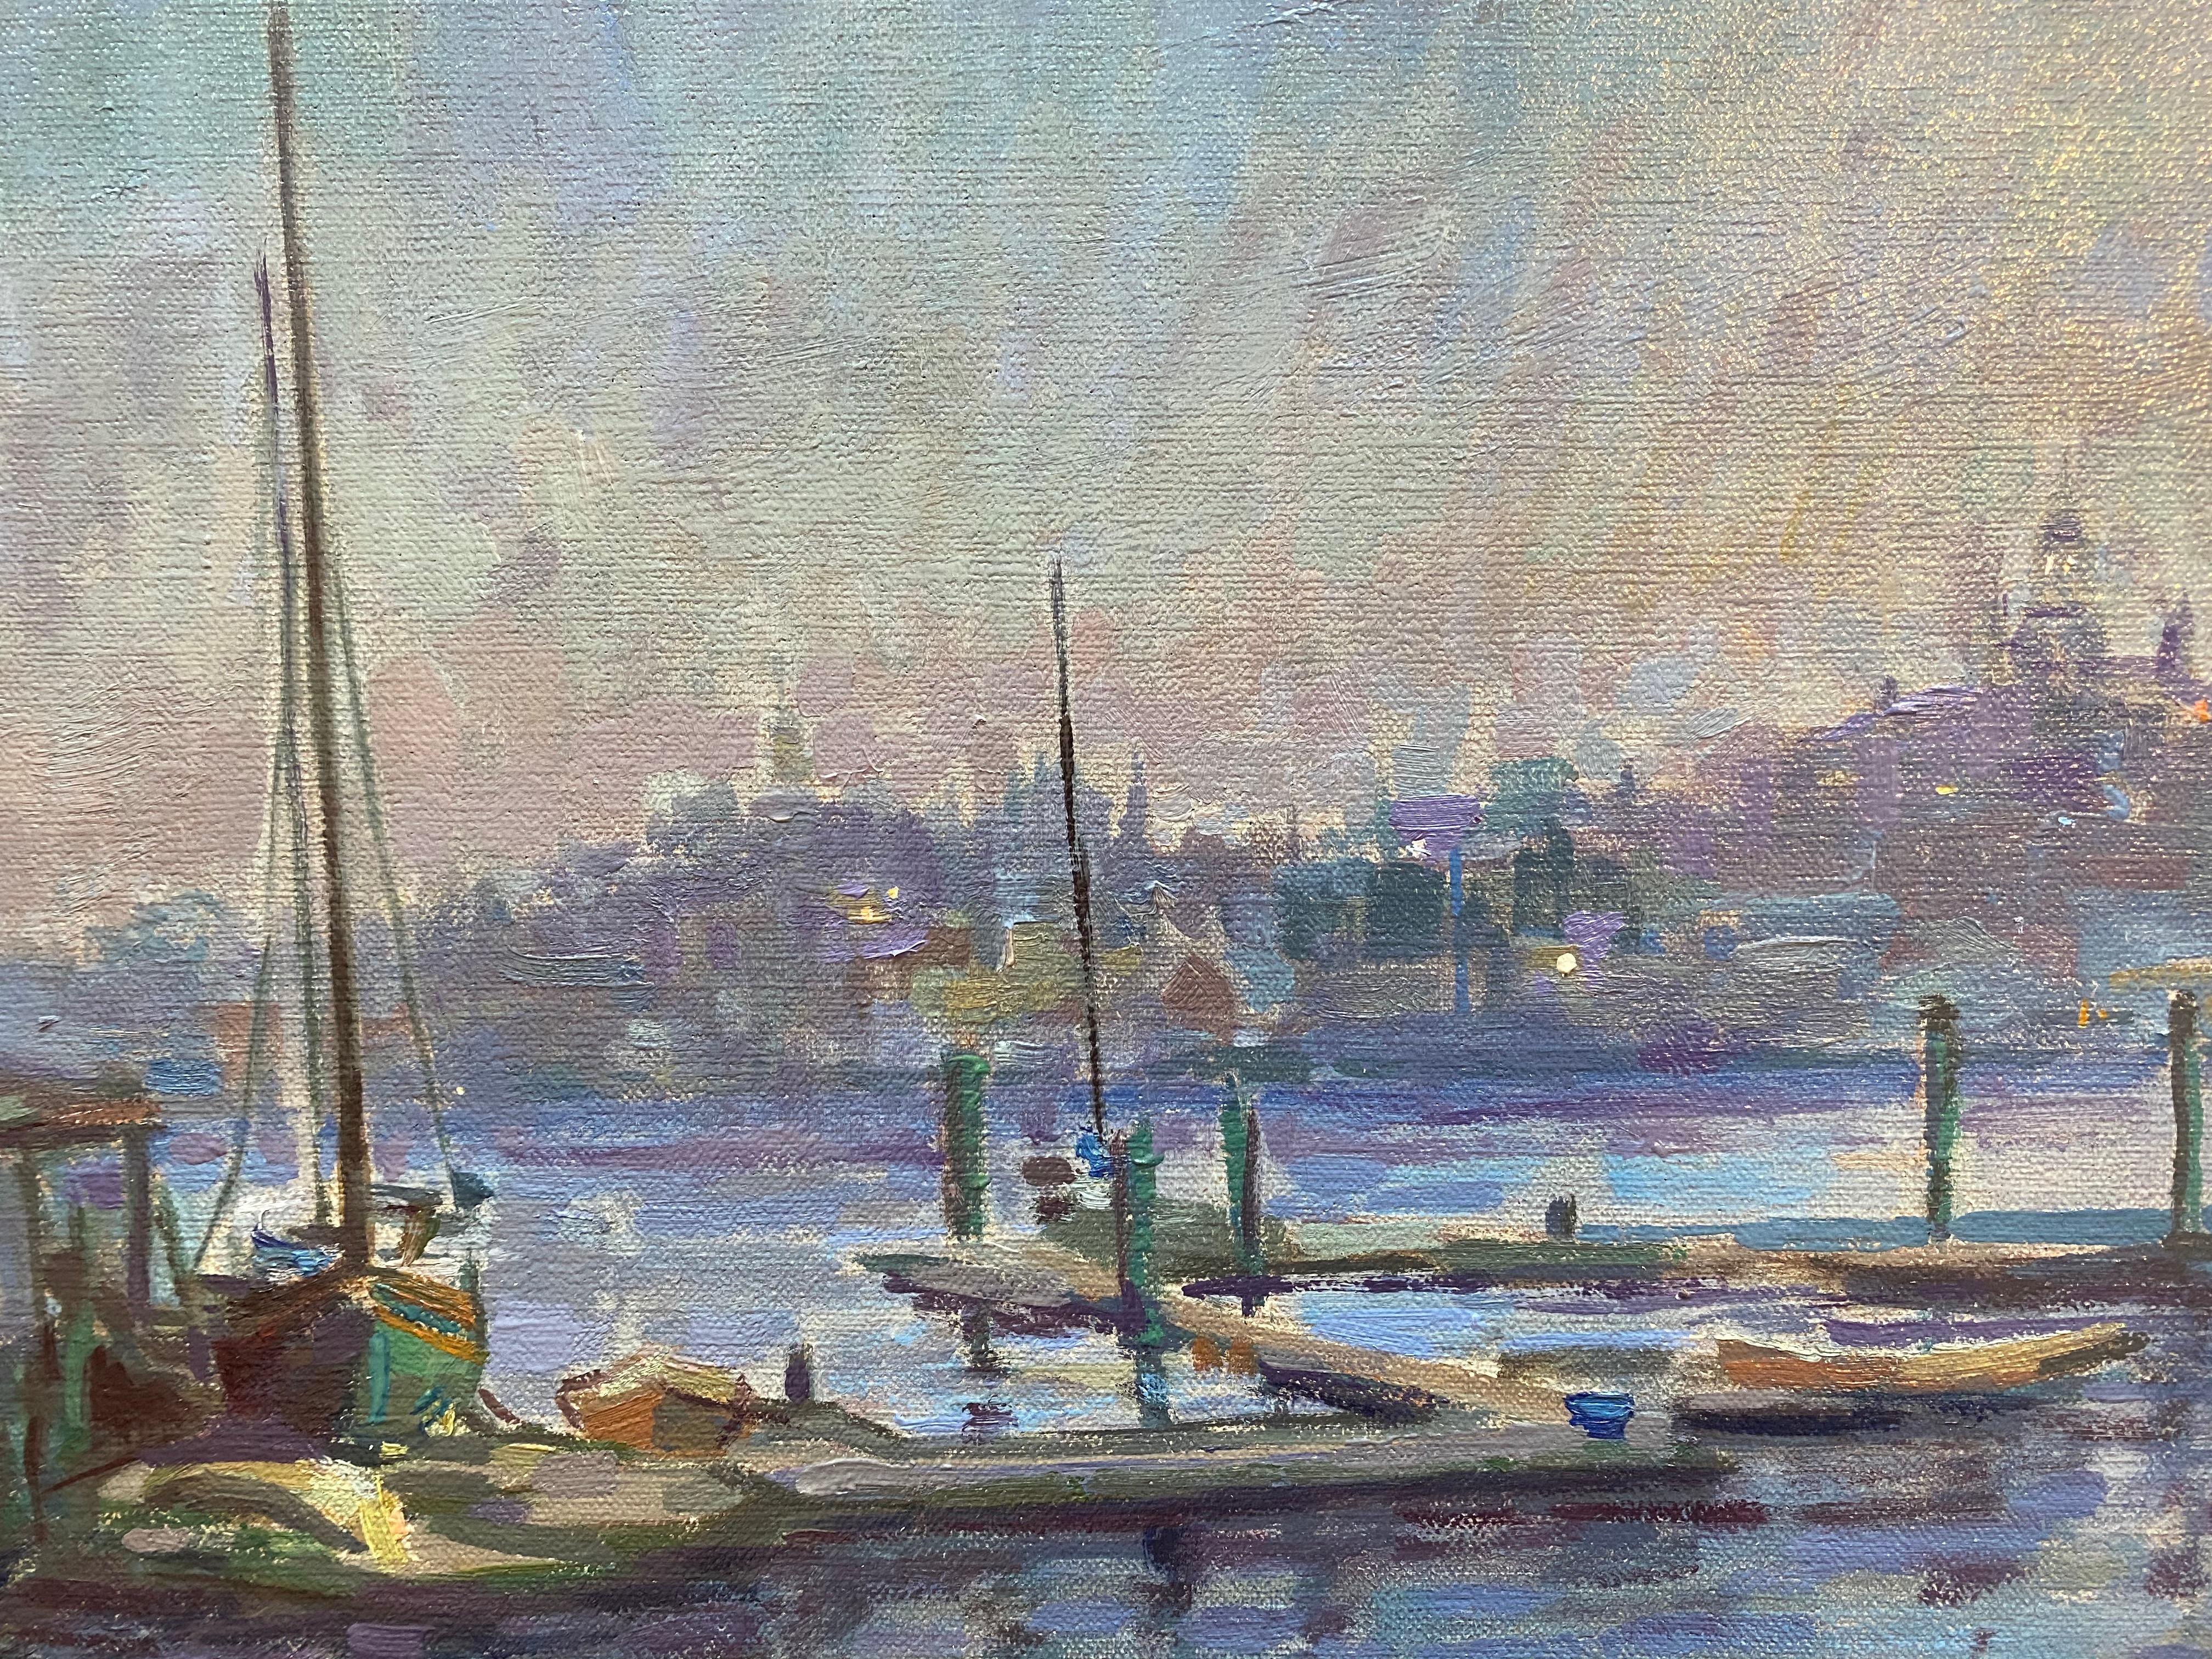 An oil painting of a dock at twilight, painted en plein air at Gloucester Harbor, one of the most recognizable settings for American painters. 


Artist Bio
Leo Mancini-Hresko began his art education in 1999 at the Art Institute of Boston at Lesley